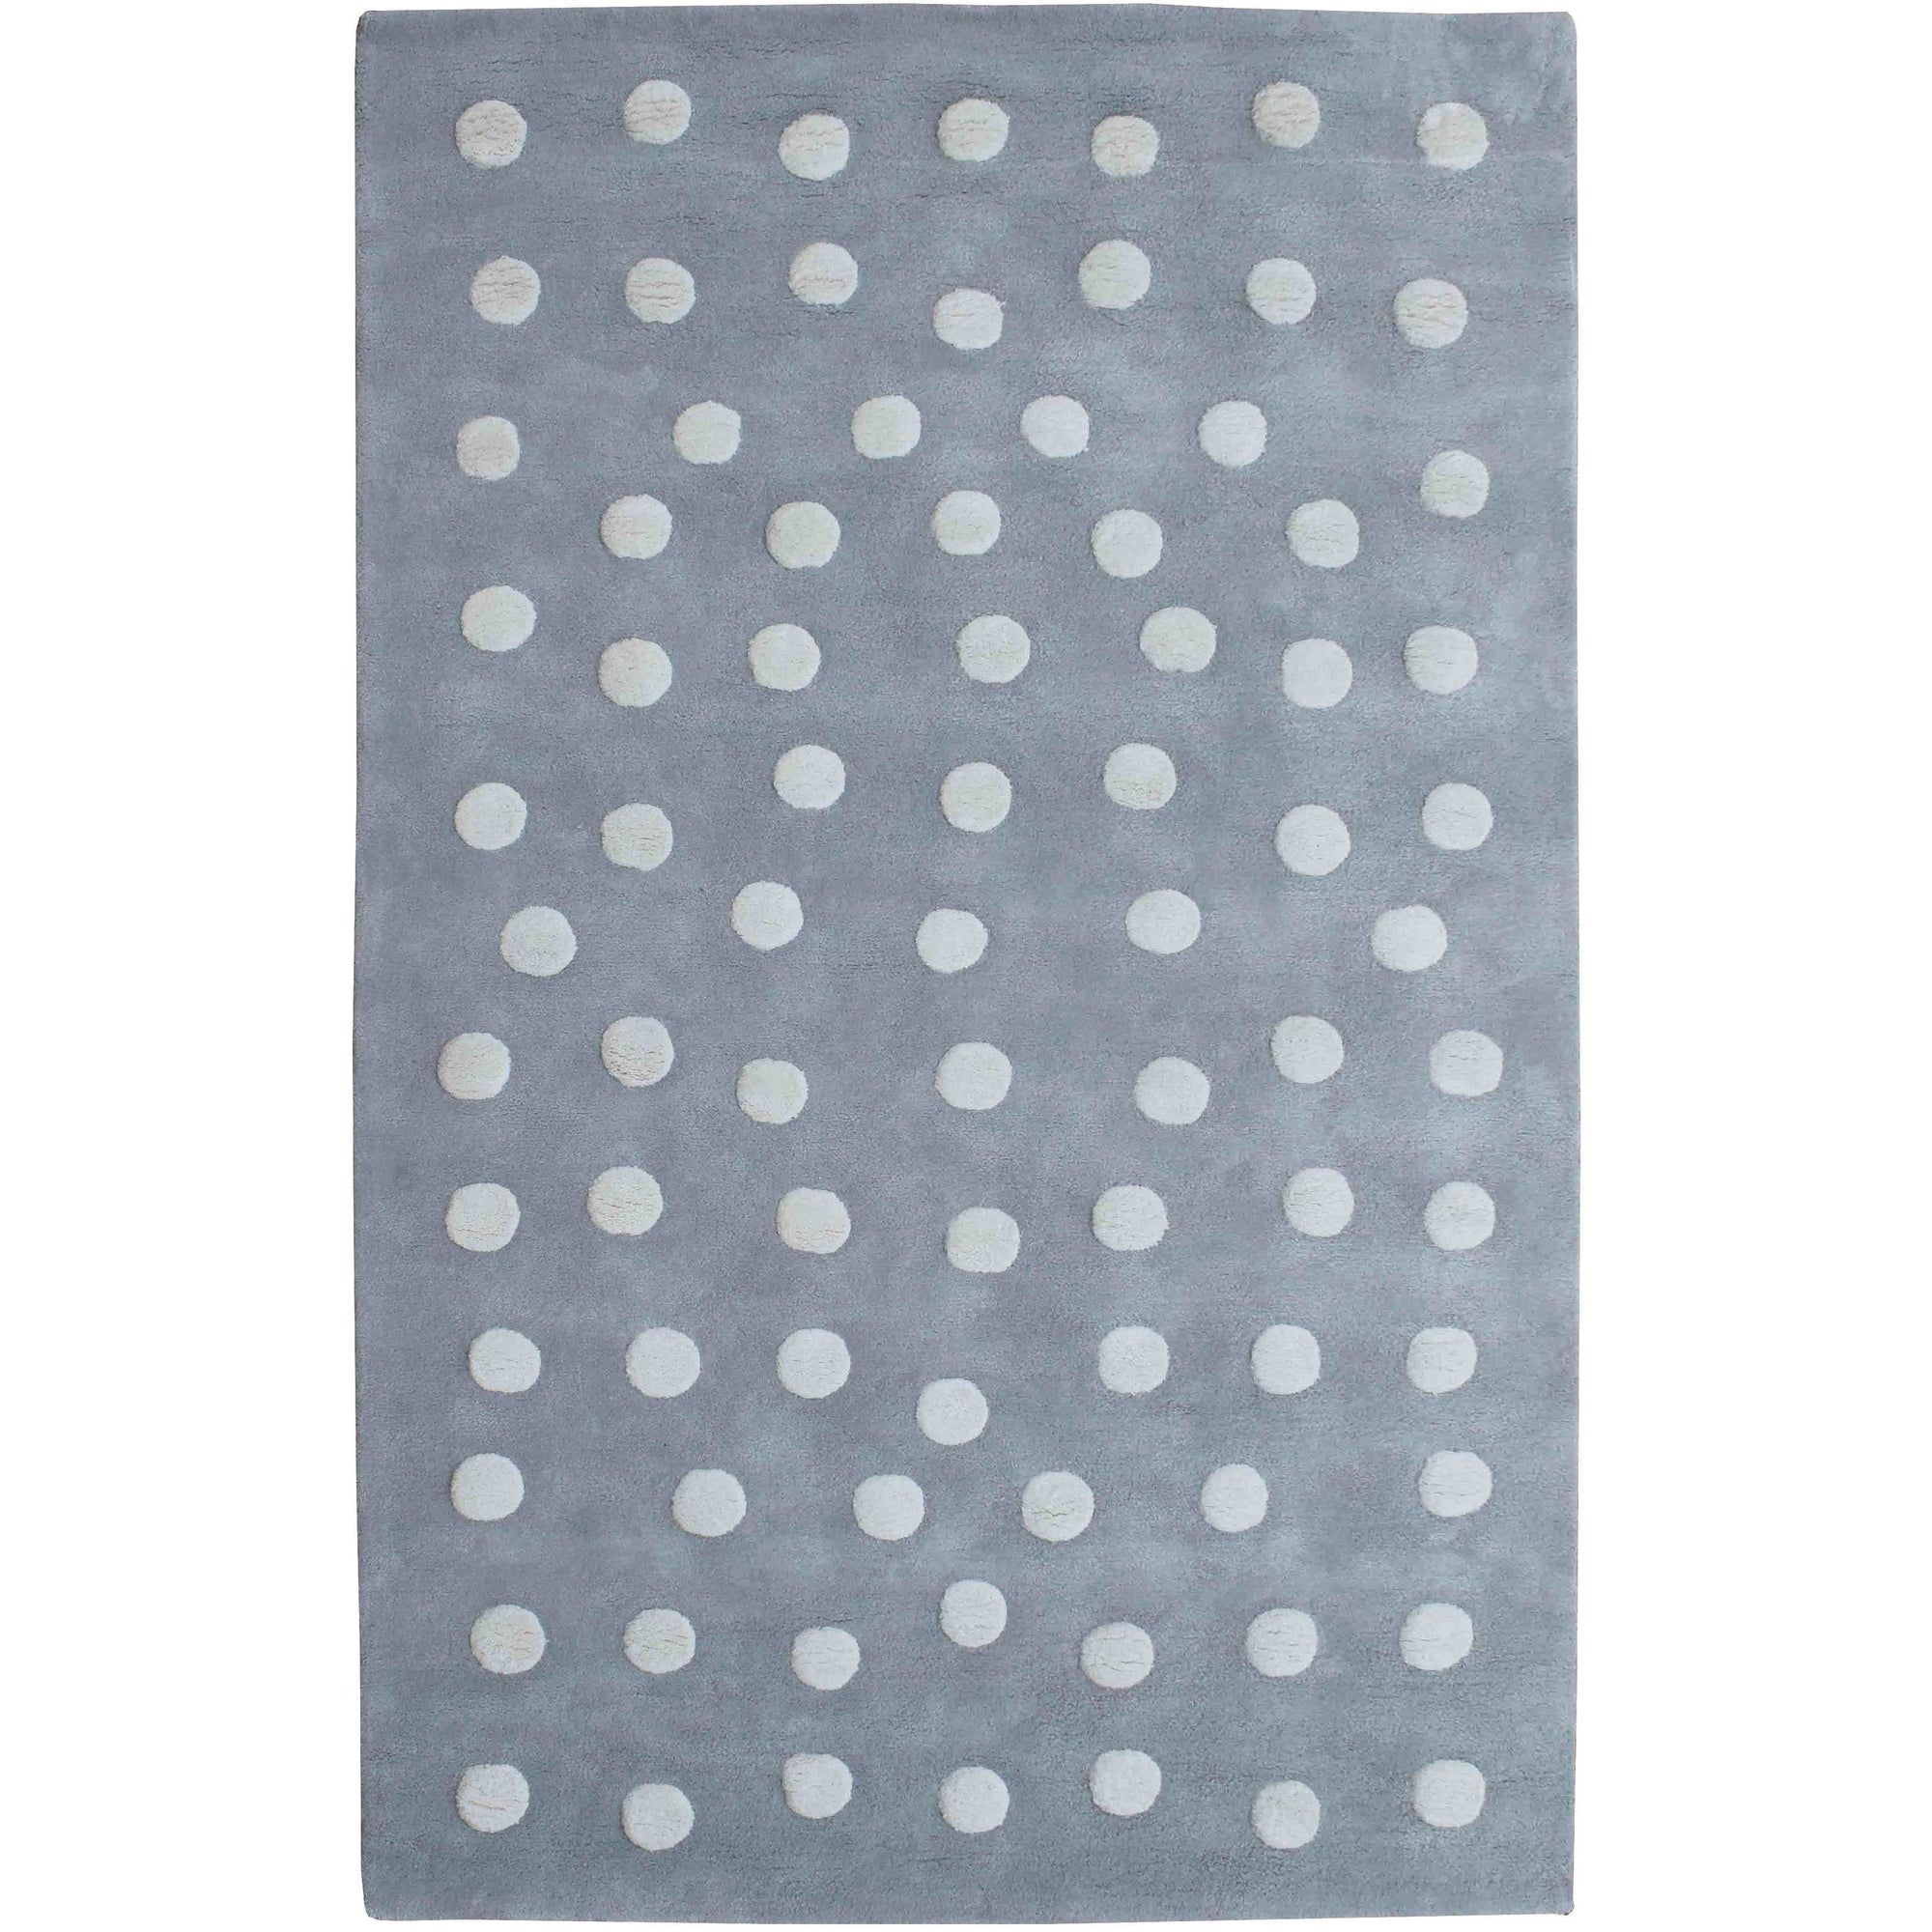 Rugs by Roo | Organic Weave Cotton Grey White Polka Dot Rug-OW-DOTGRY-0508